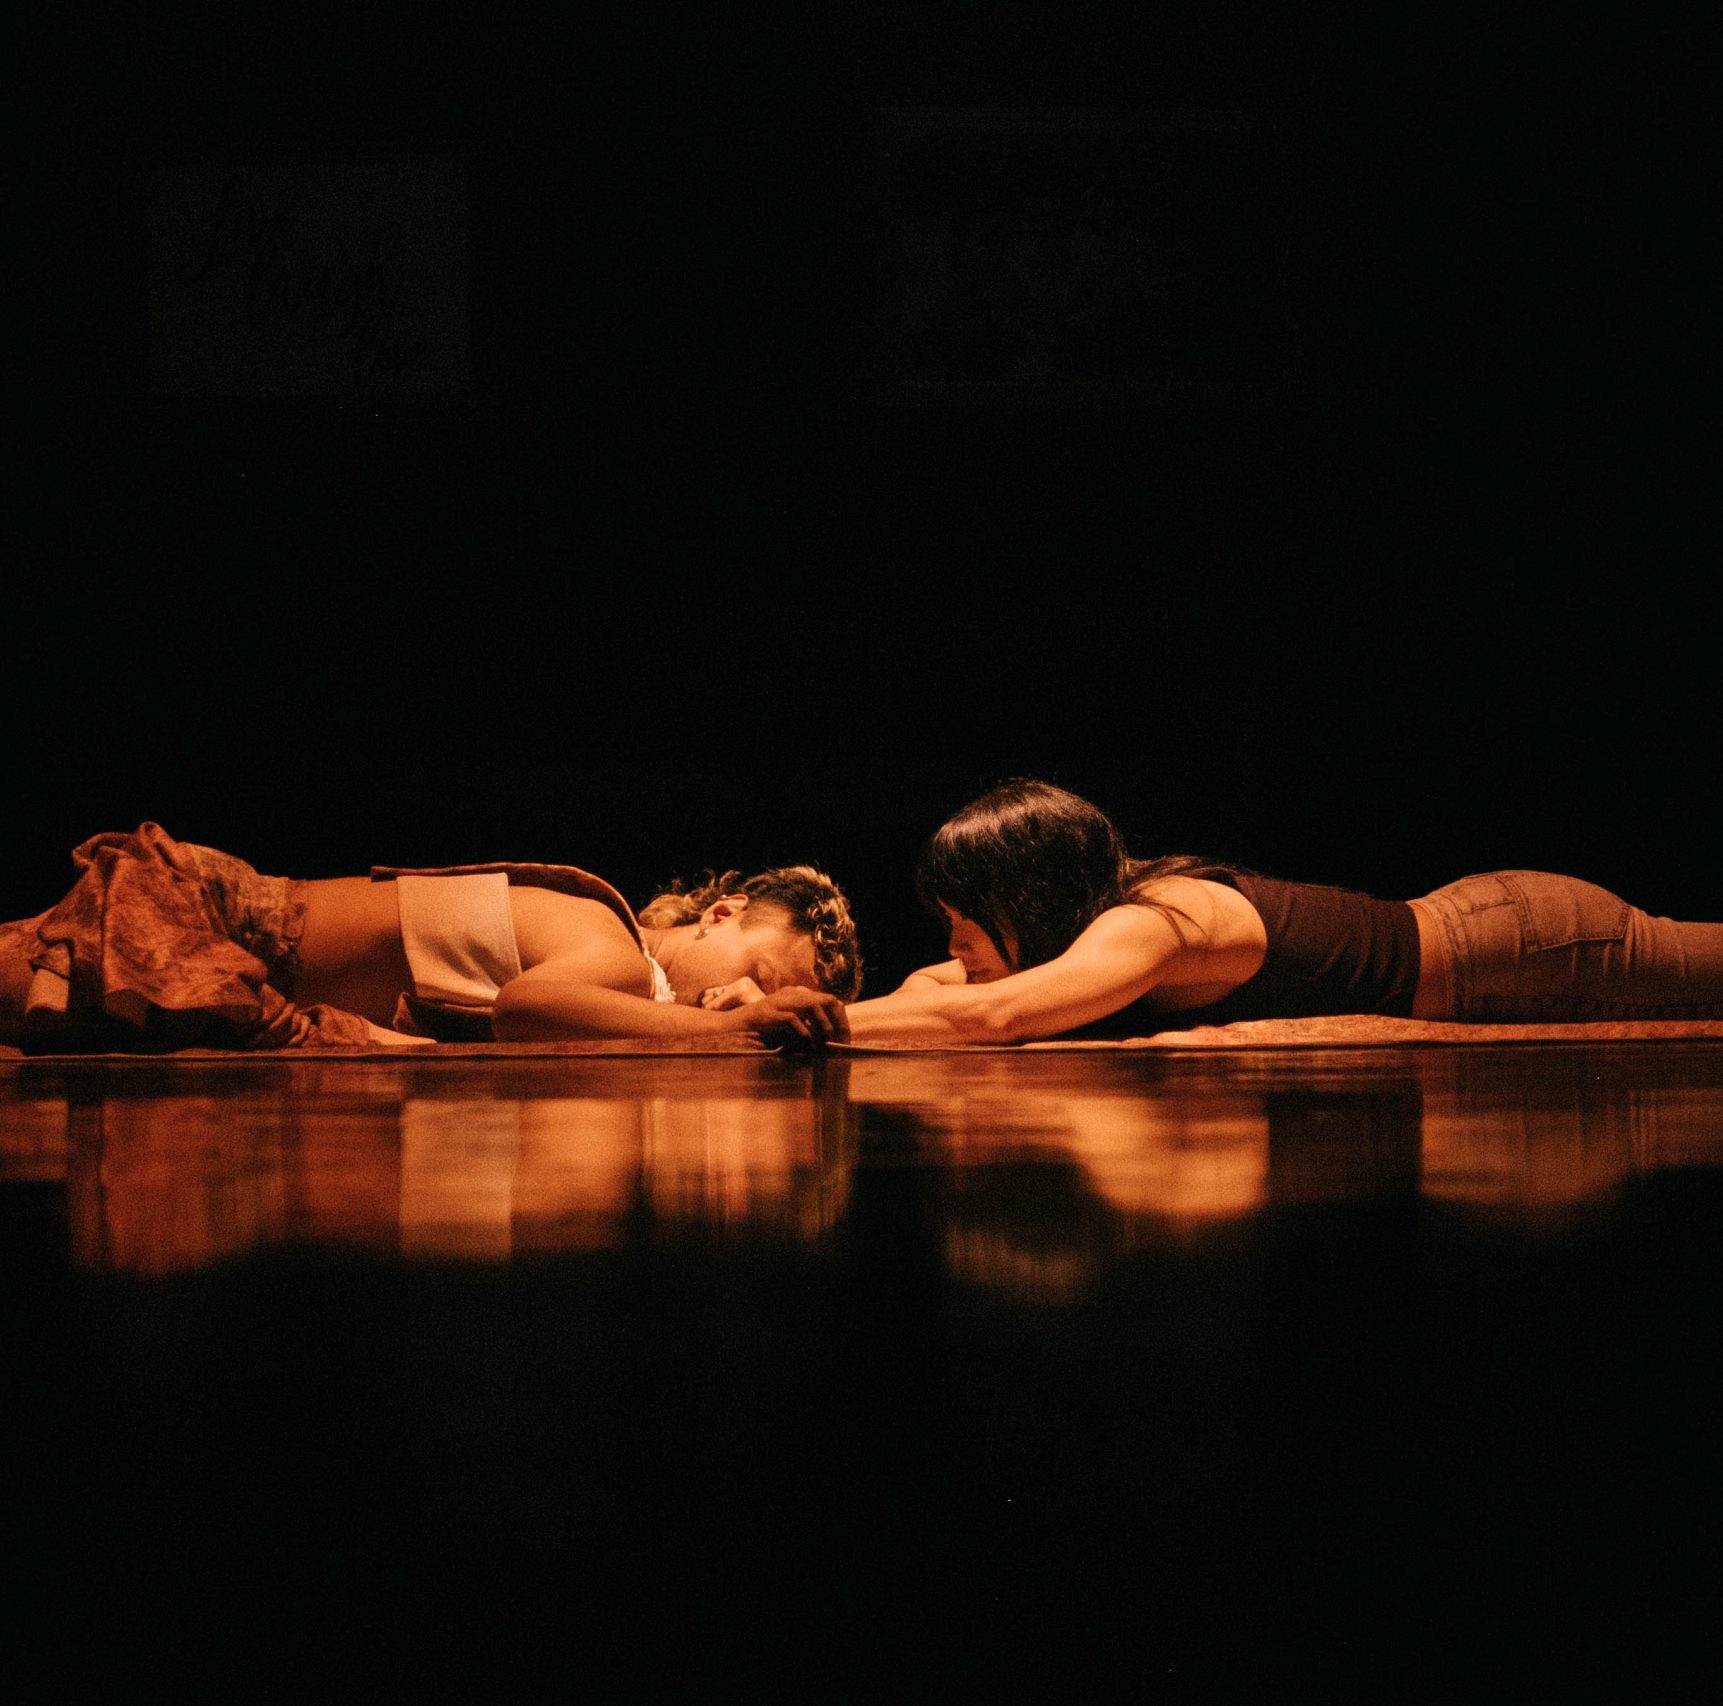 Two dance artists lie on their stomachs facing each other on a dark dance floor. There is a warm light shining on them and one has their had down with eyes closed as if sleeping and the other is looking and reaching towards the first.